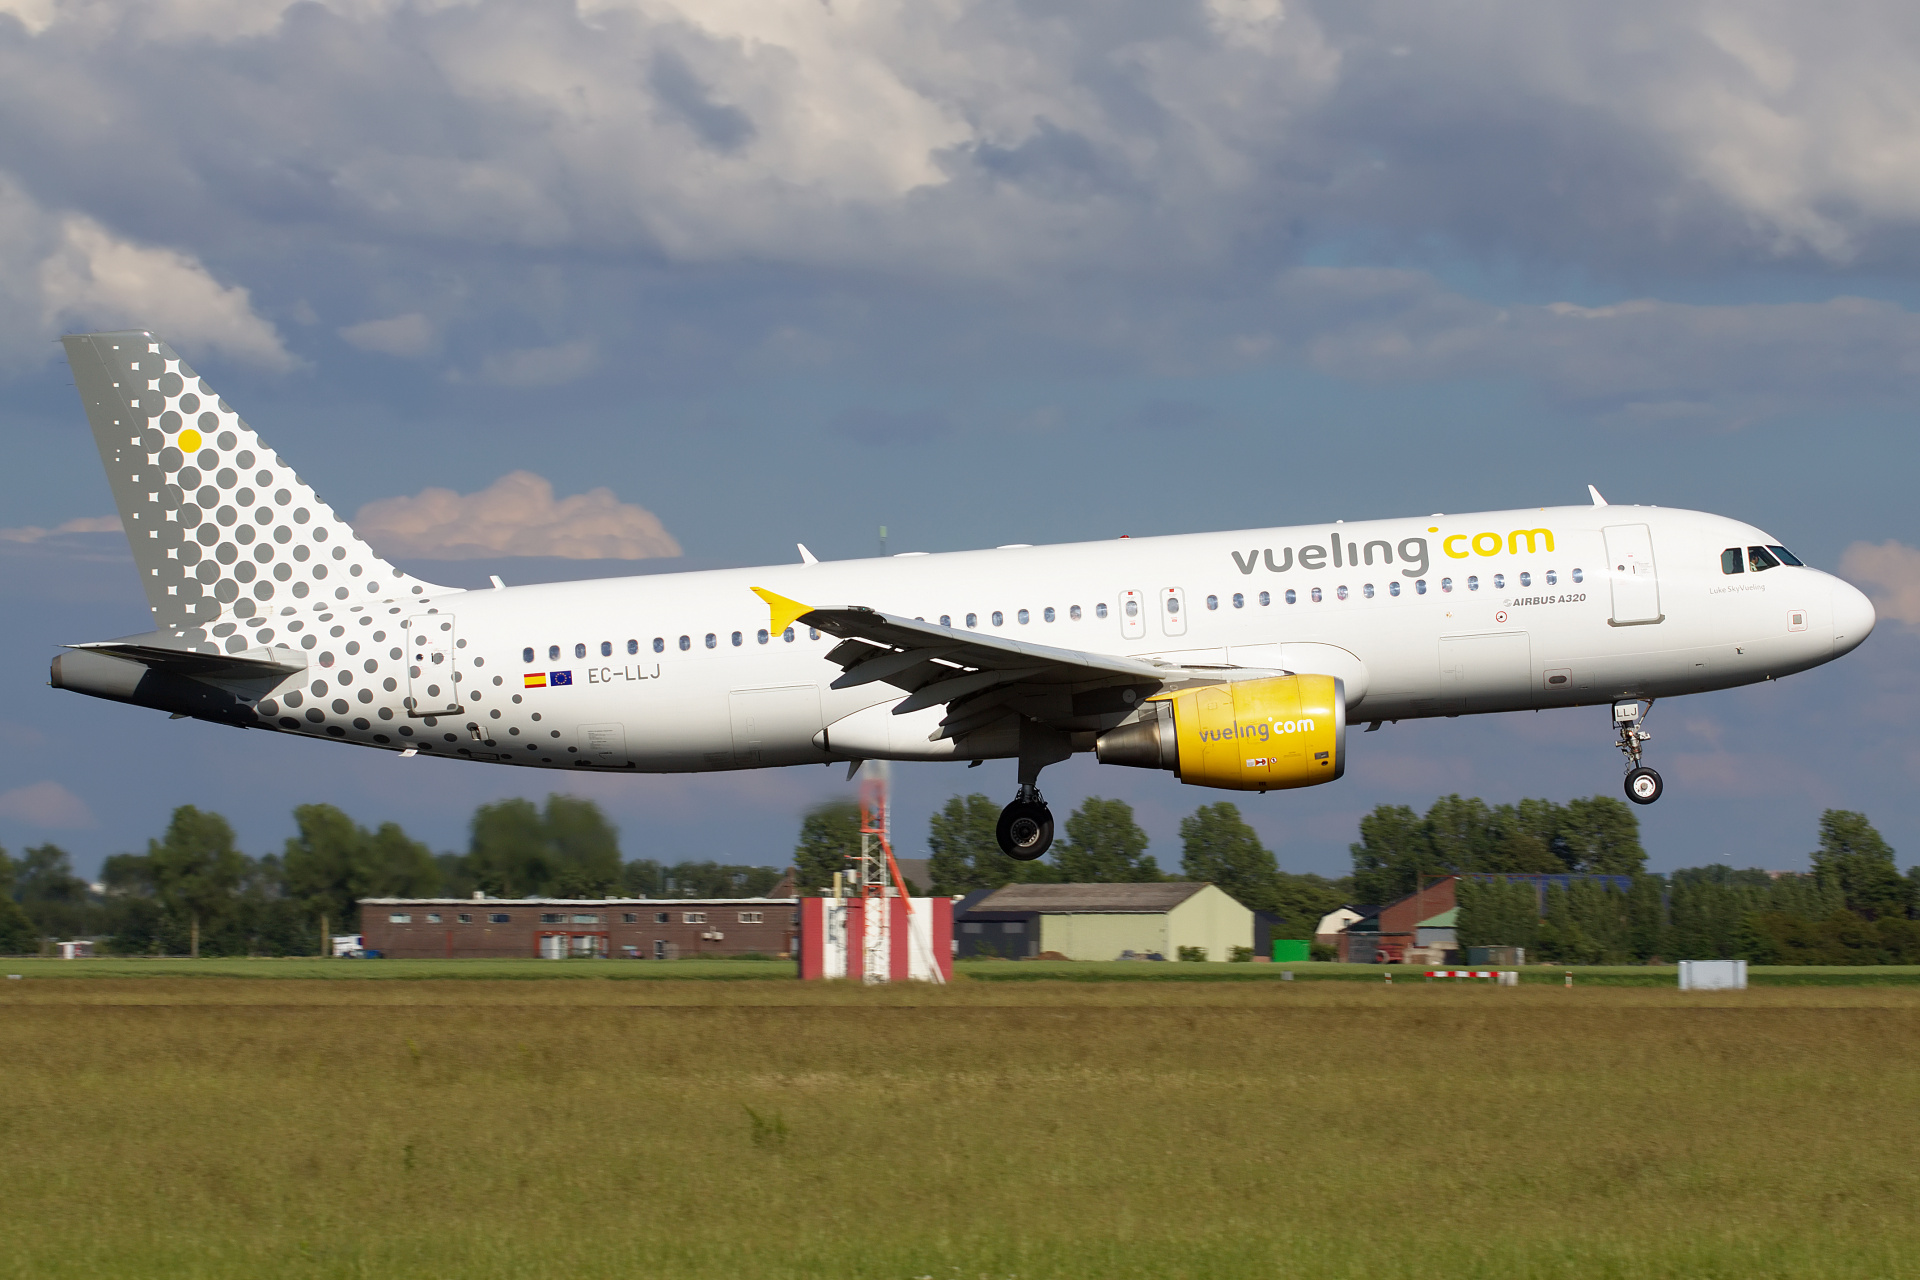 EC-LLJ (Samoloty » Spotting na Schiphol » Airbus A320-200 » Vueling Airlines)